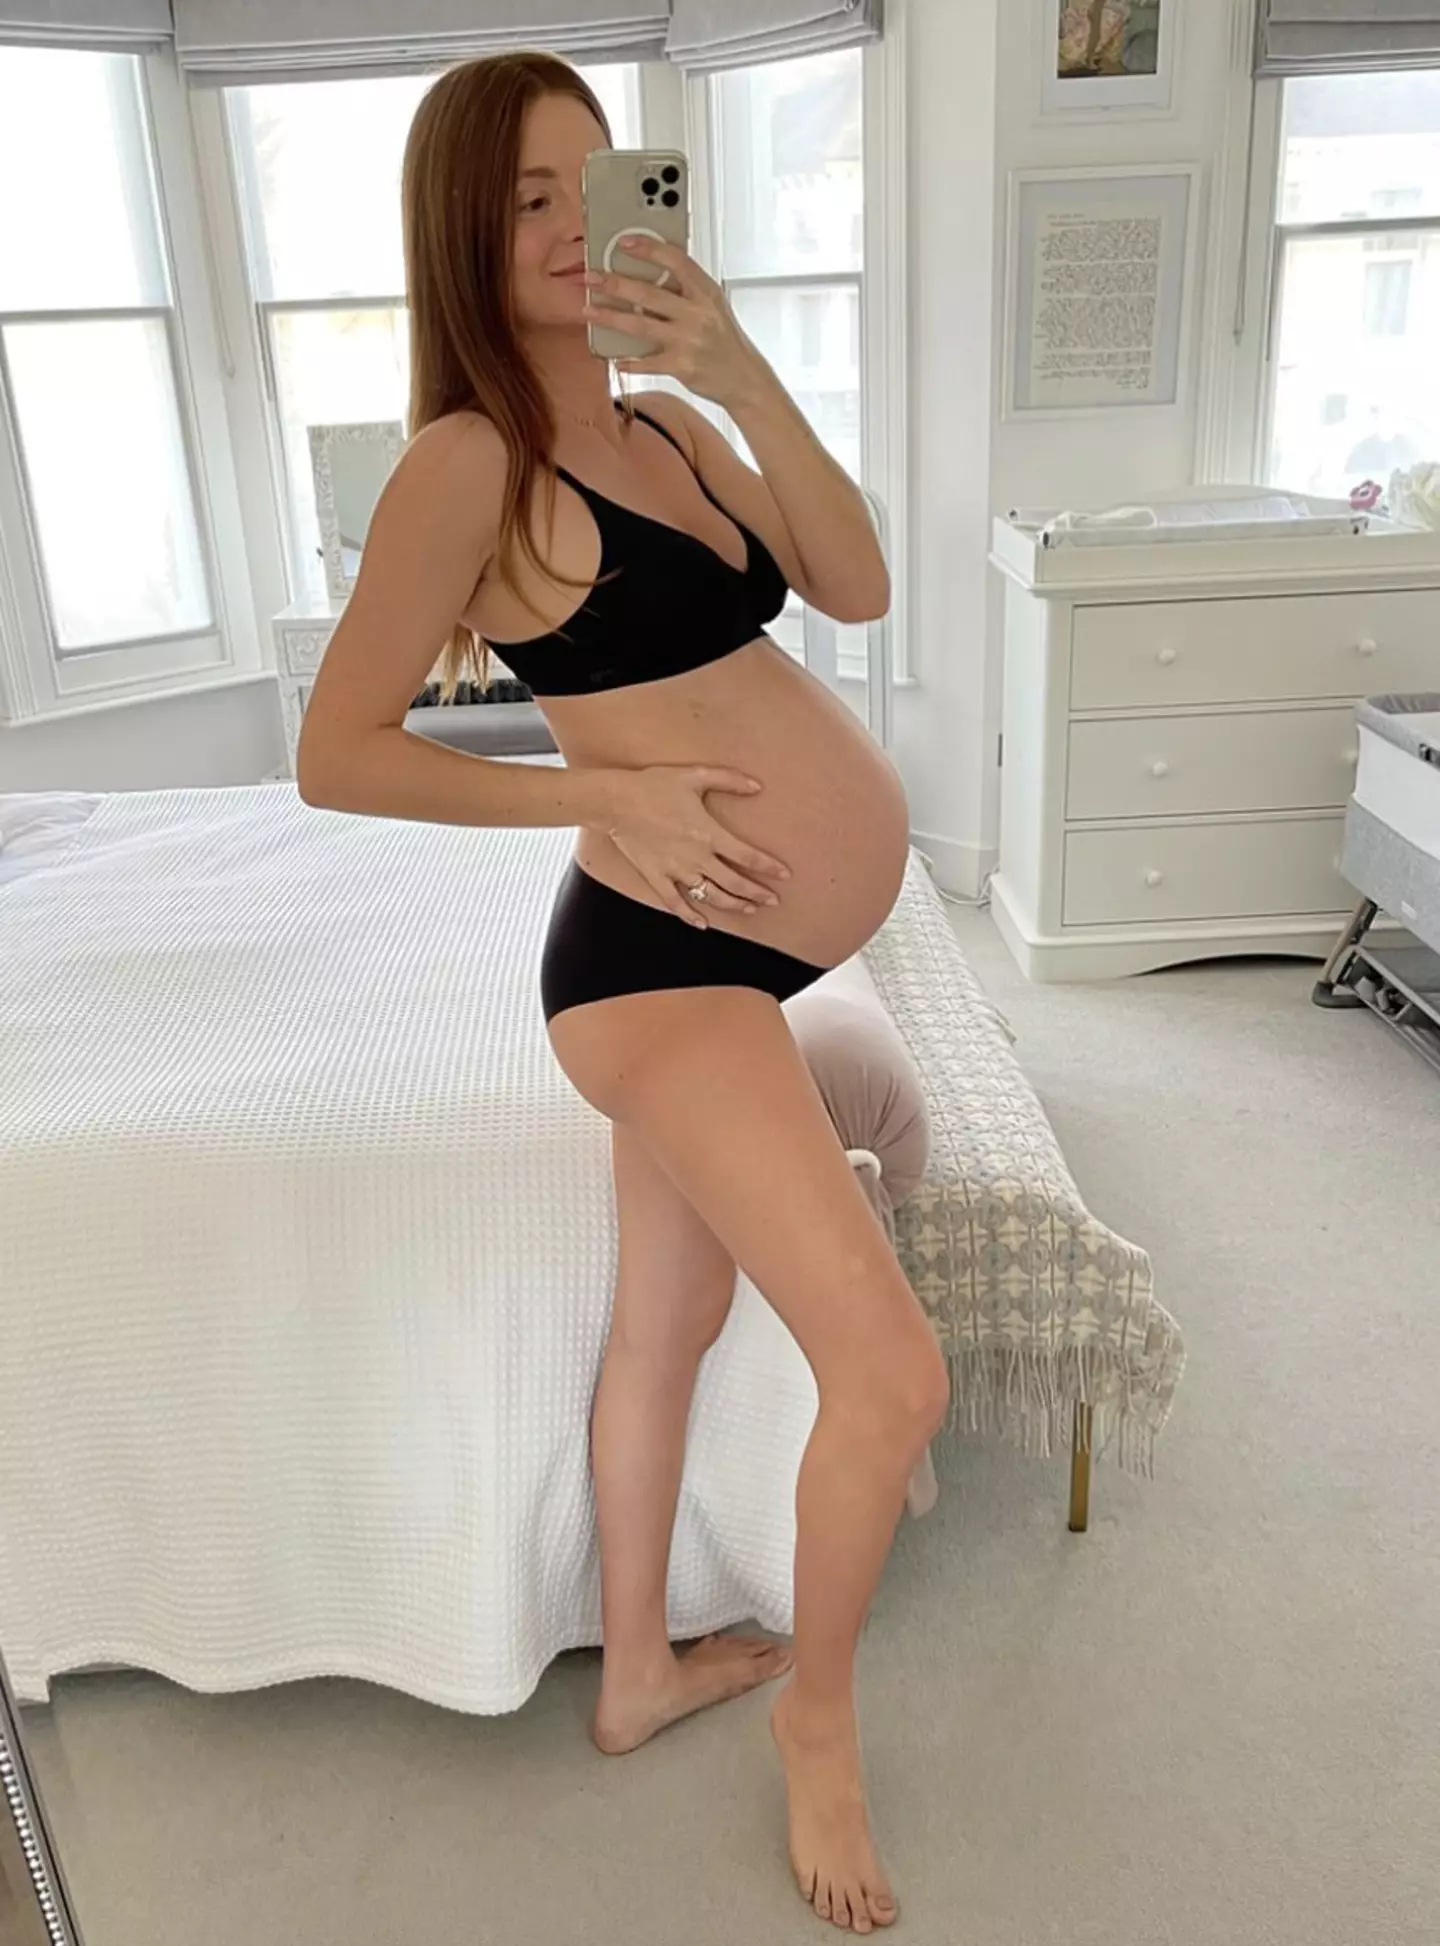 Millie announced she was expecting back in June (